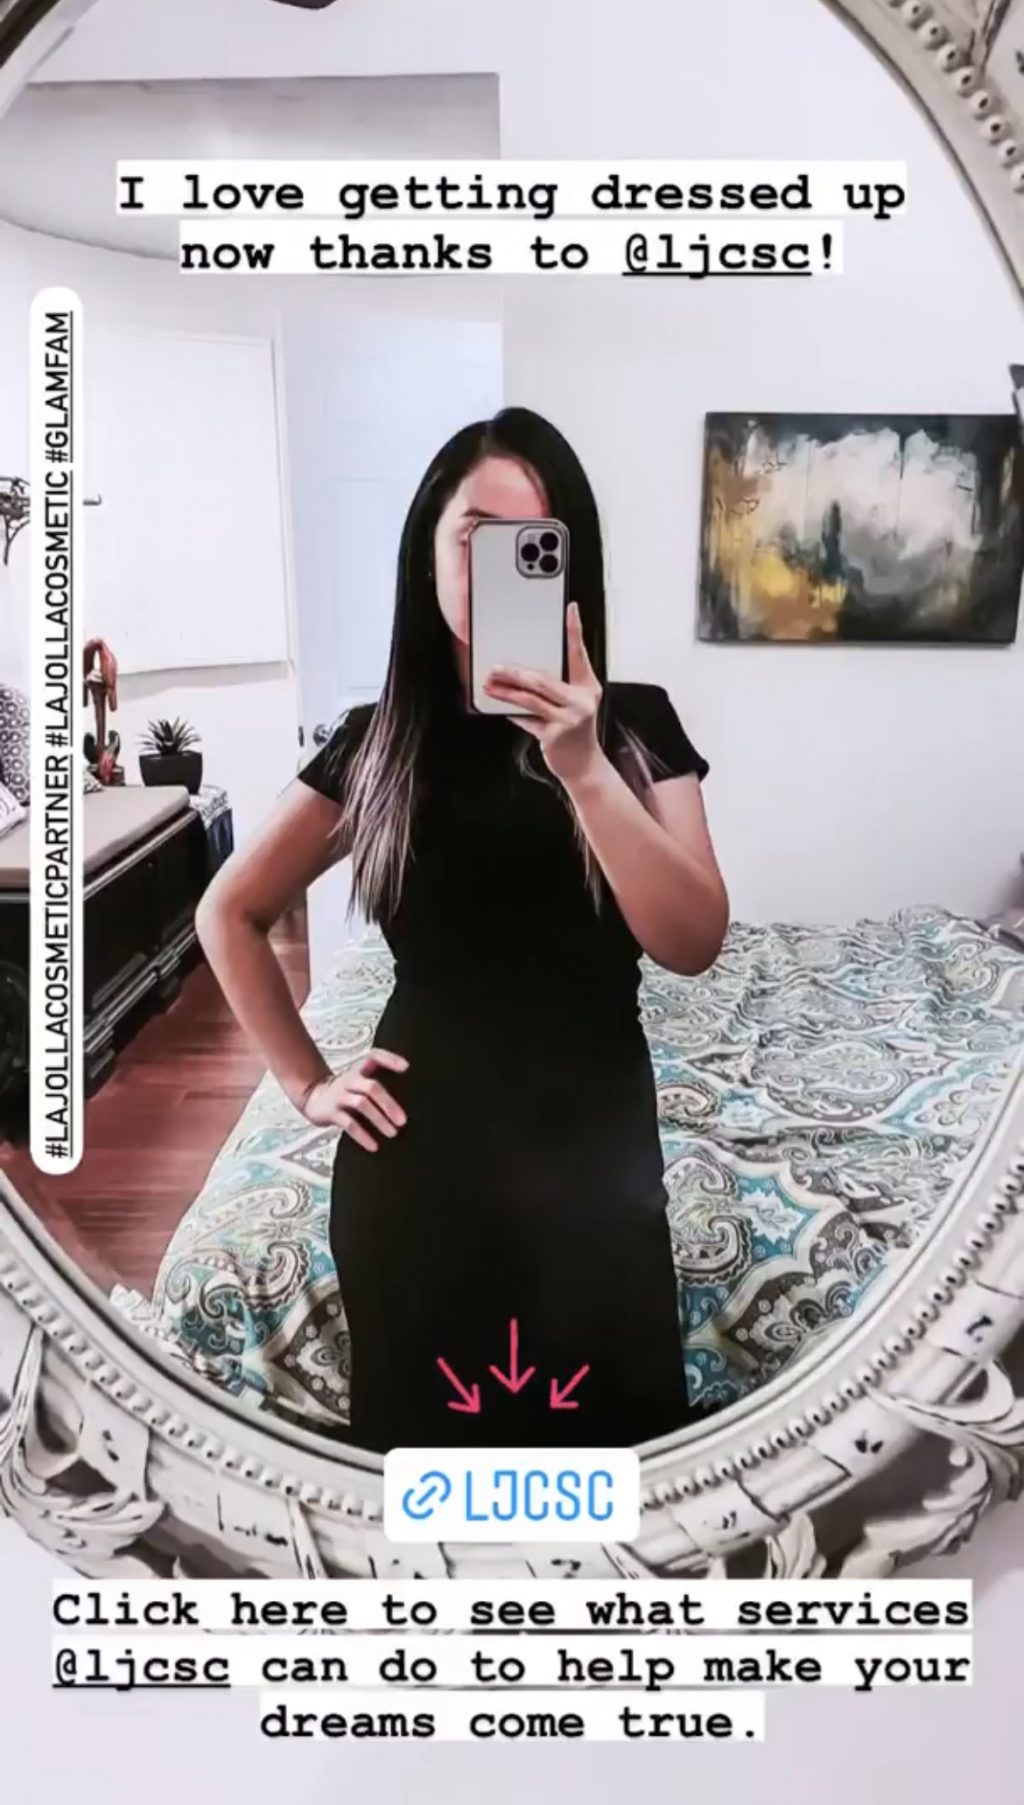 A mirror selfie of Fatima standing confidently in a semi-tight dress after receiving CoolScultping treatments at LJC, with the caption "I love getting dressed up now thanks to @ljcsc!"